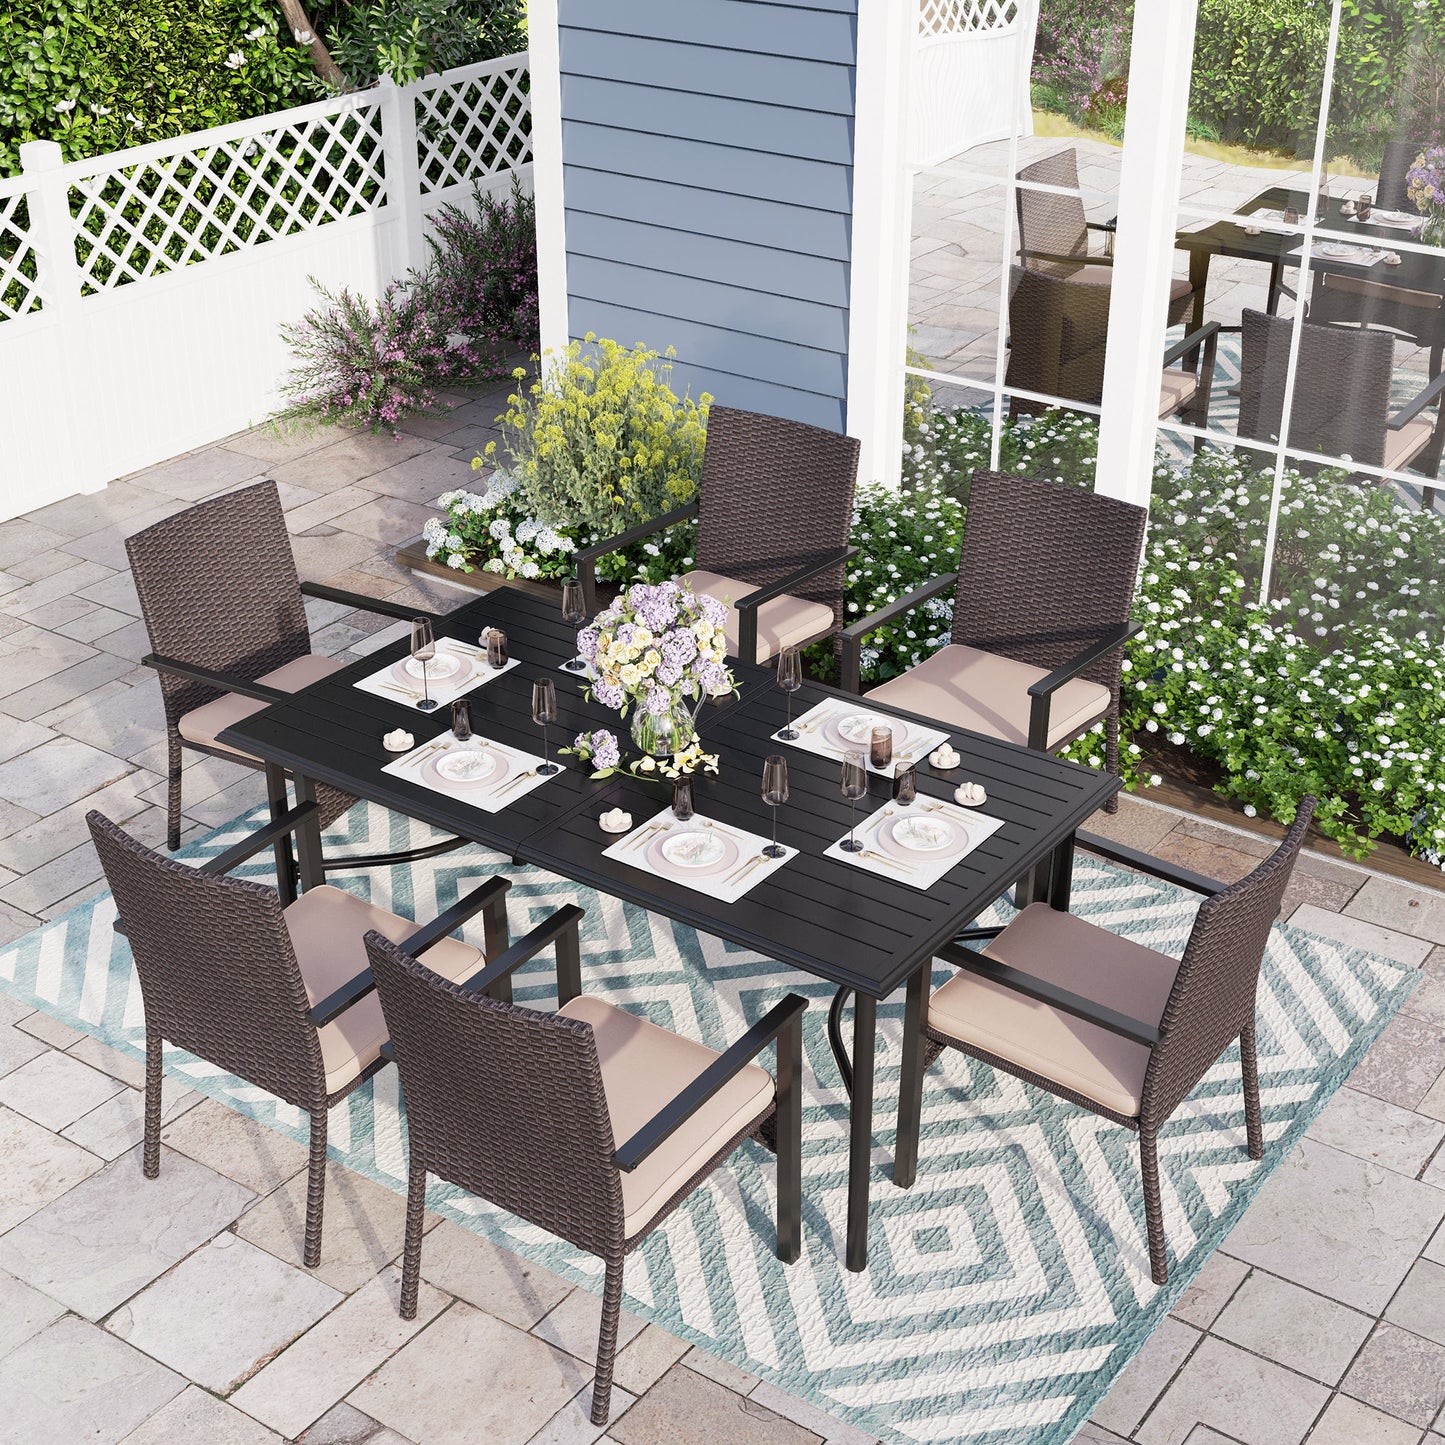 Sophia & William Patio Rattan Dining Set Metal Table with Chairs, Beige Cushion